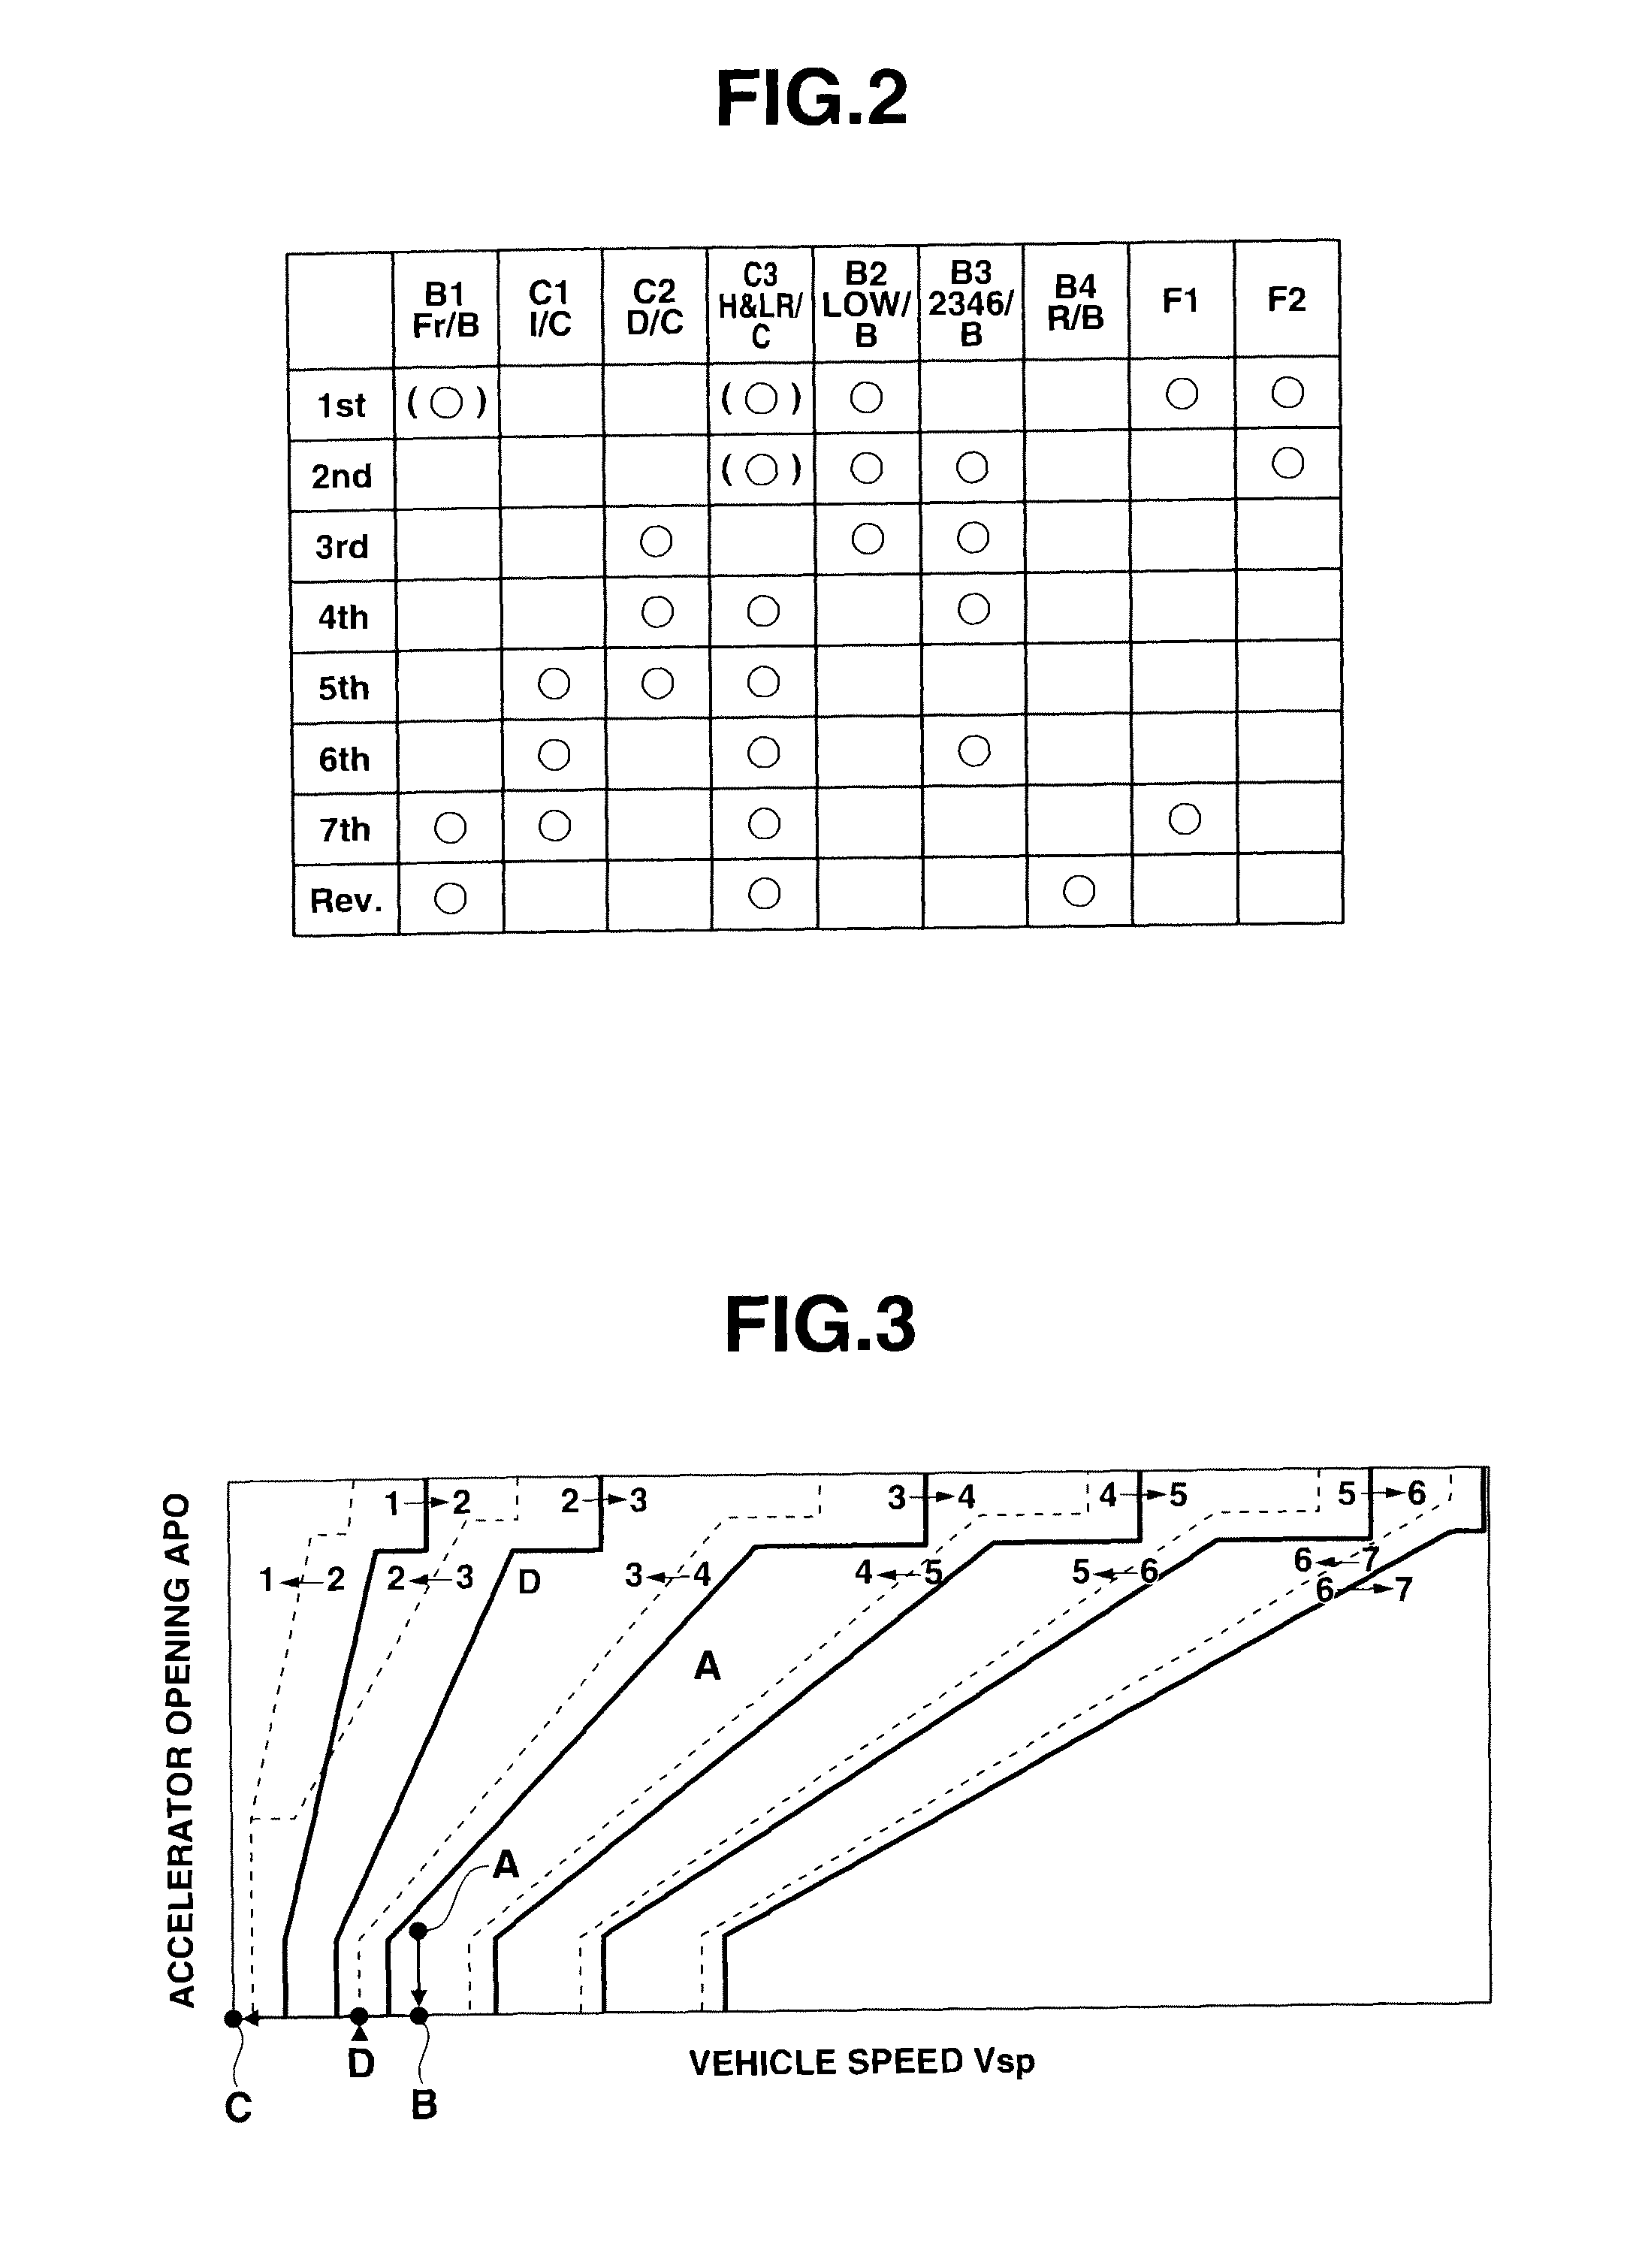 Control apparatus and method for automatic transmission